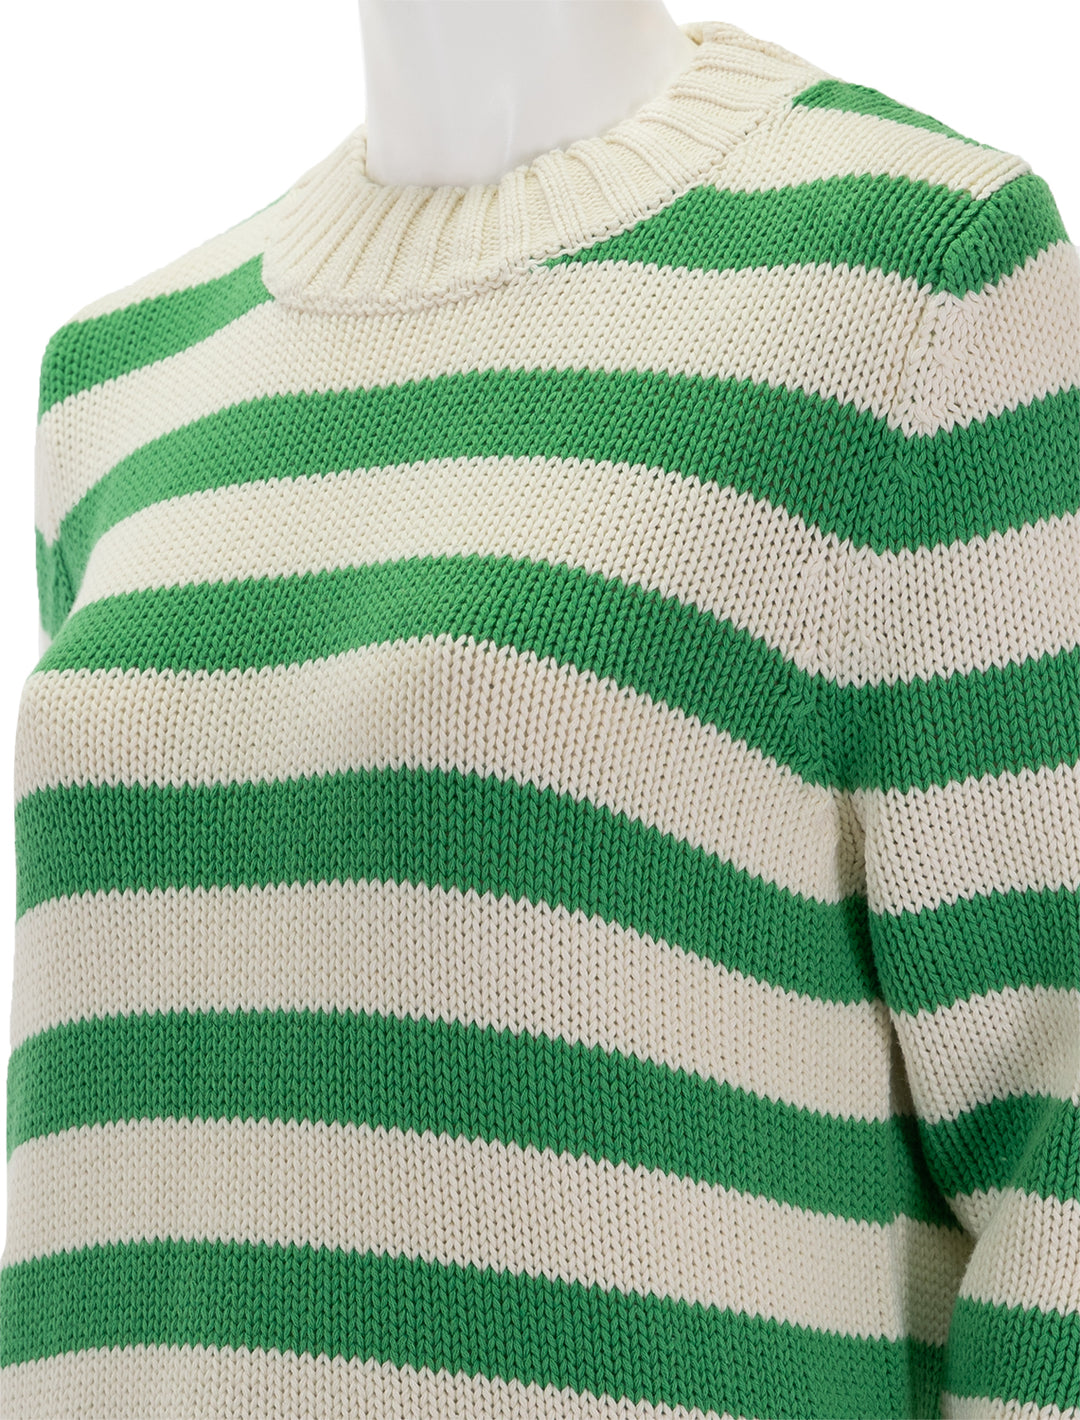 Close-up view of KULE's the tatum in cream and green stripe.